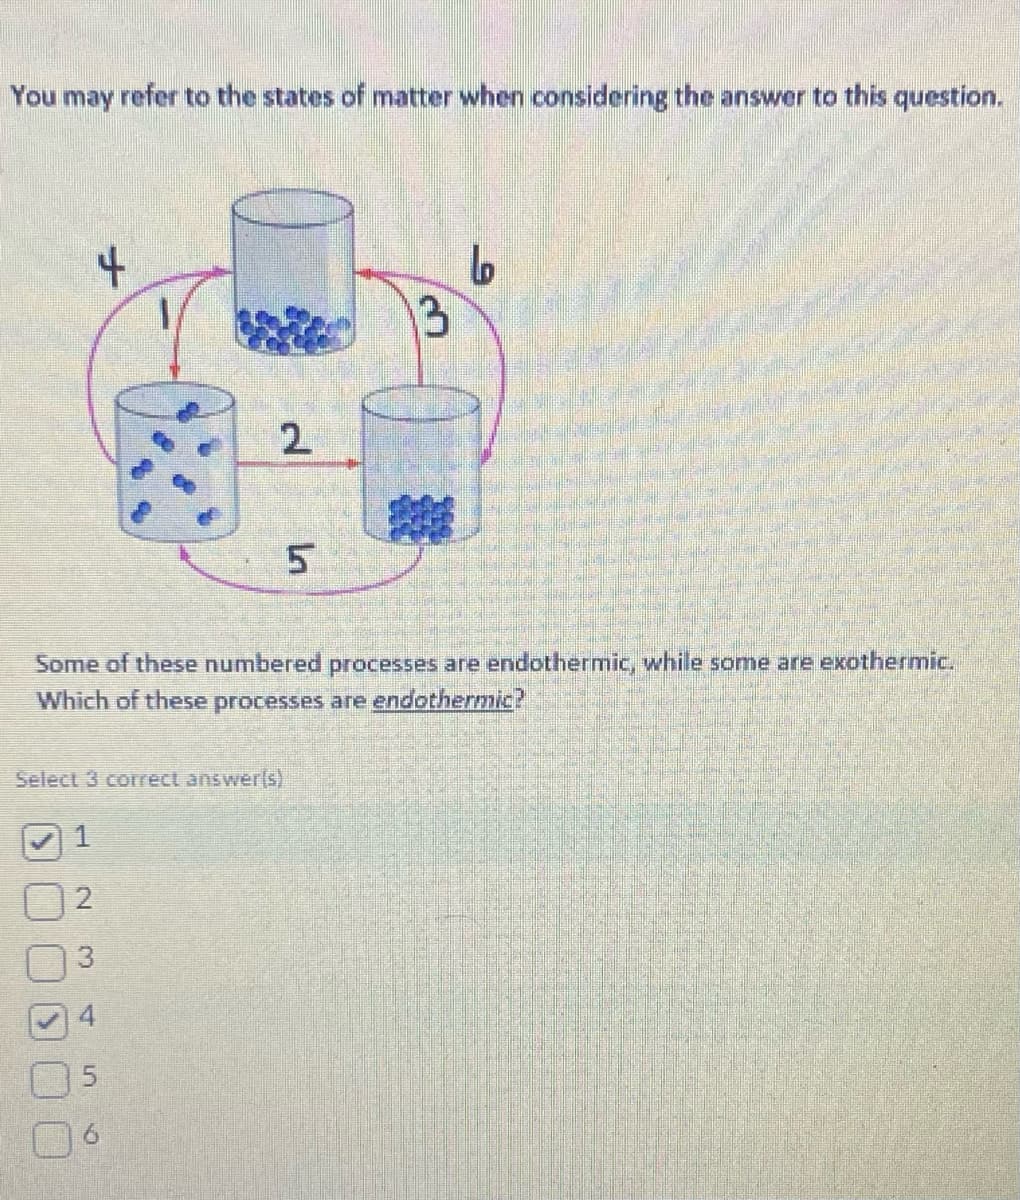 You may refer to the states of matter when considering the answer to this question.
4
Some of these numbered processes are endothermic, while some are exothermic.
Which of these processes are endothermic?
Select 3 correct answer(s)
2
3
2
5
L
Lo
13